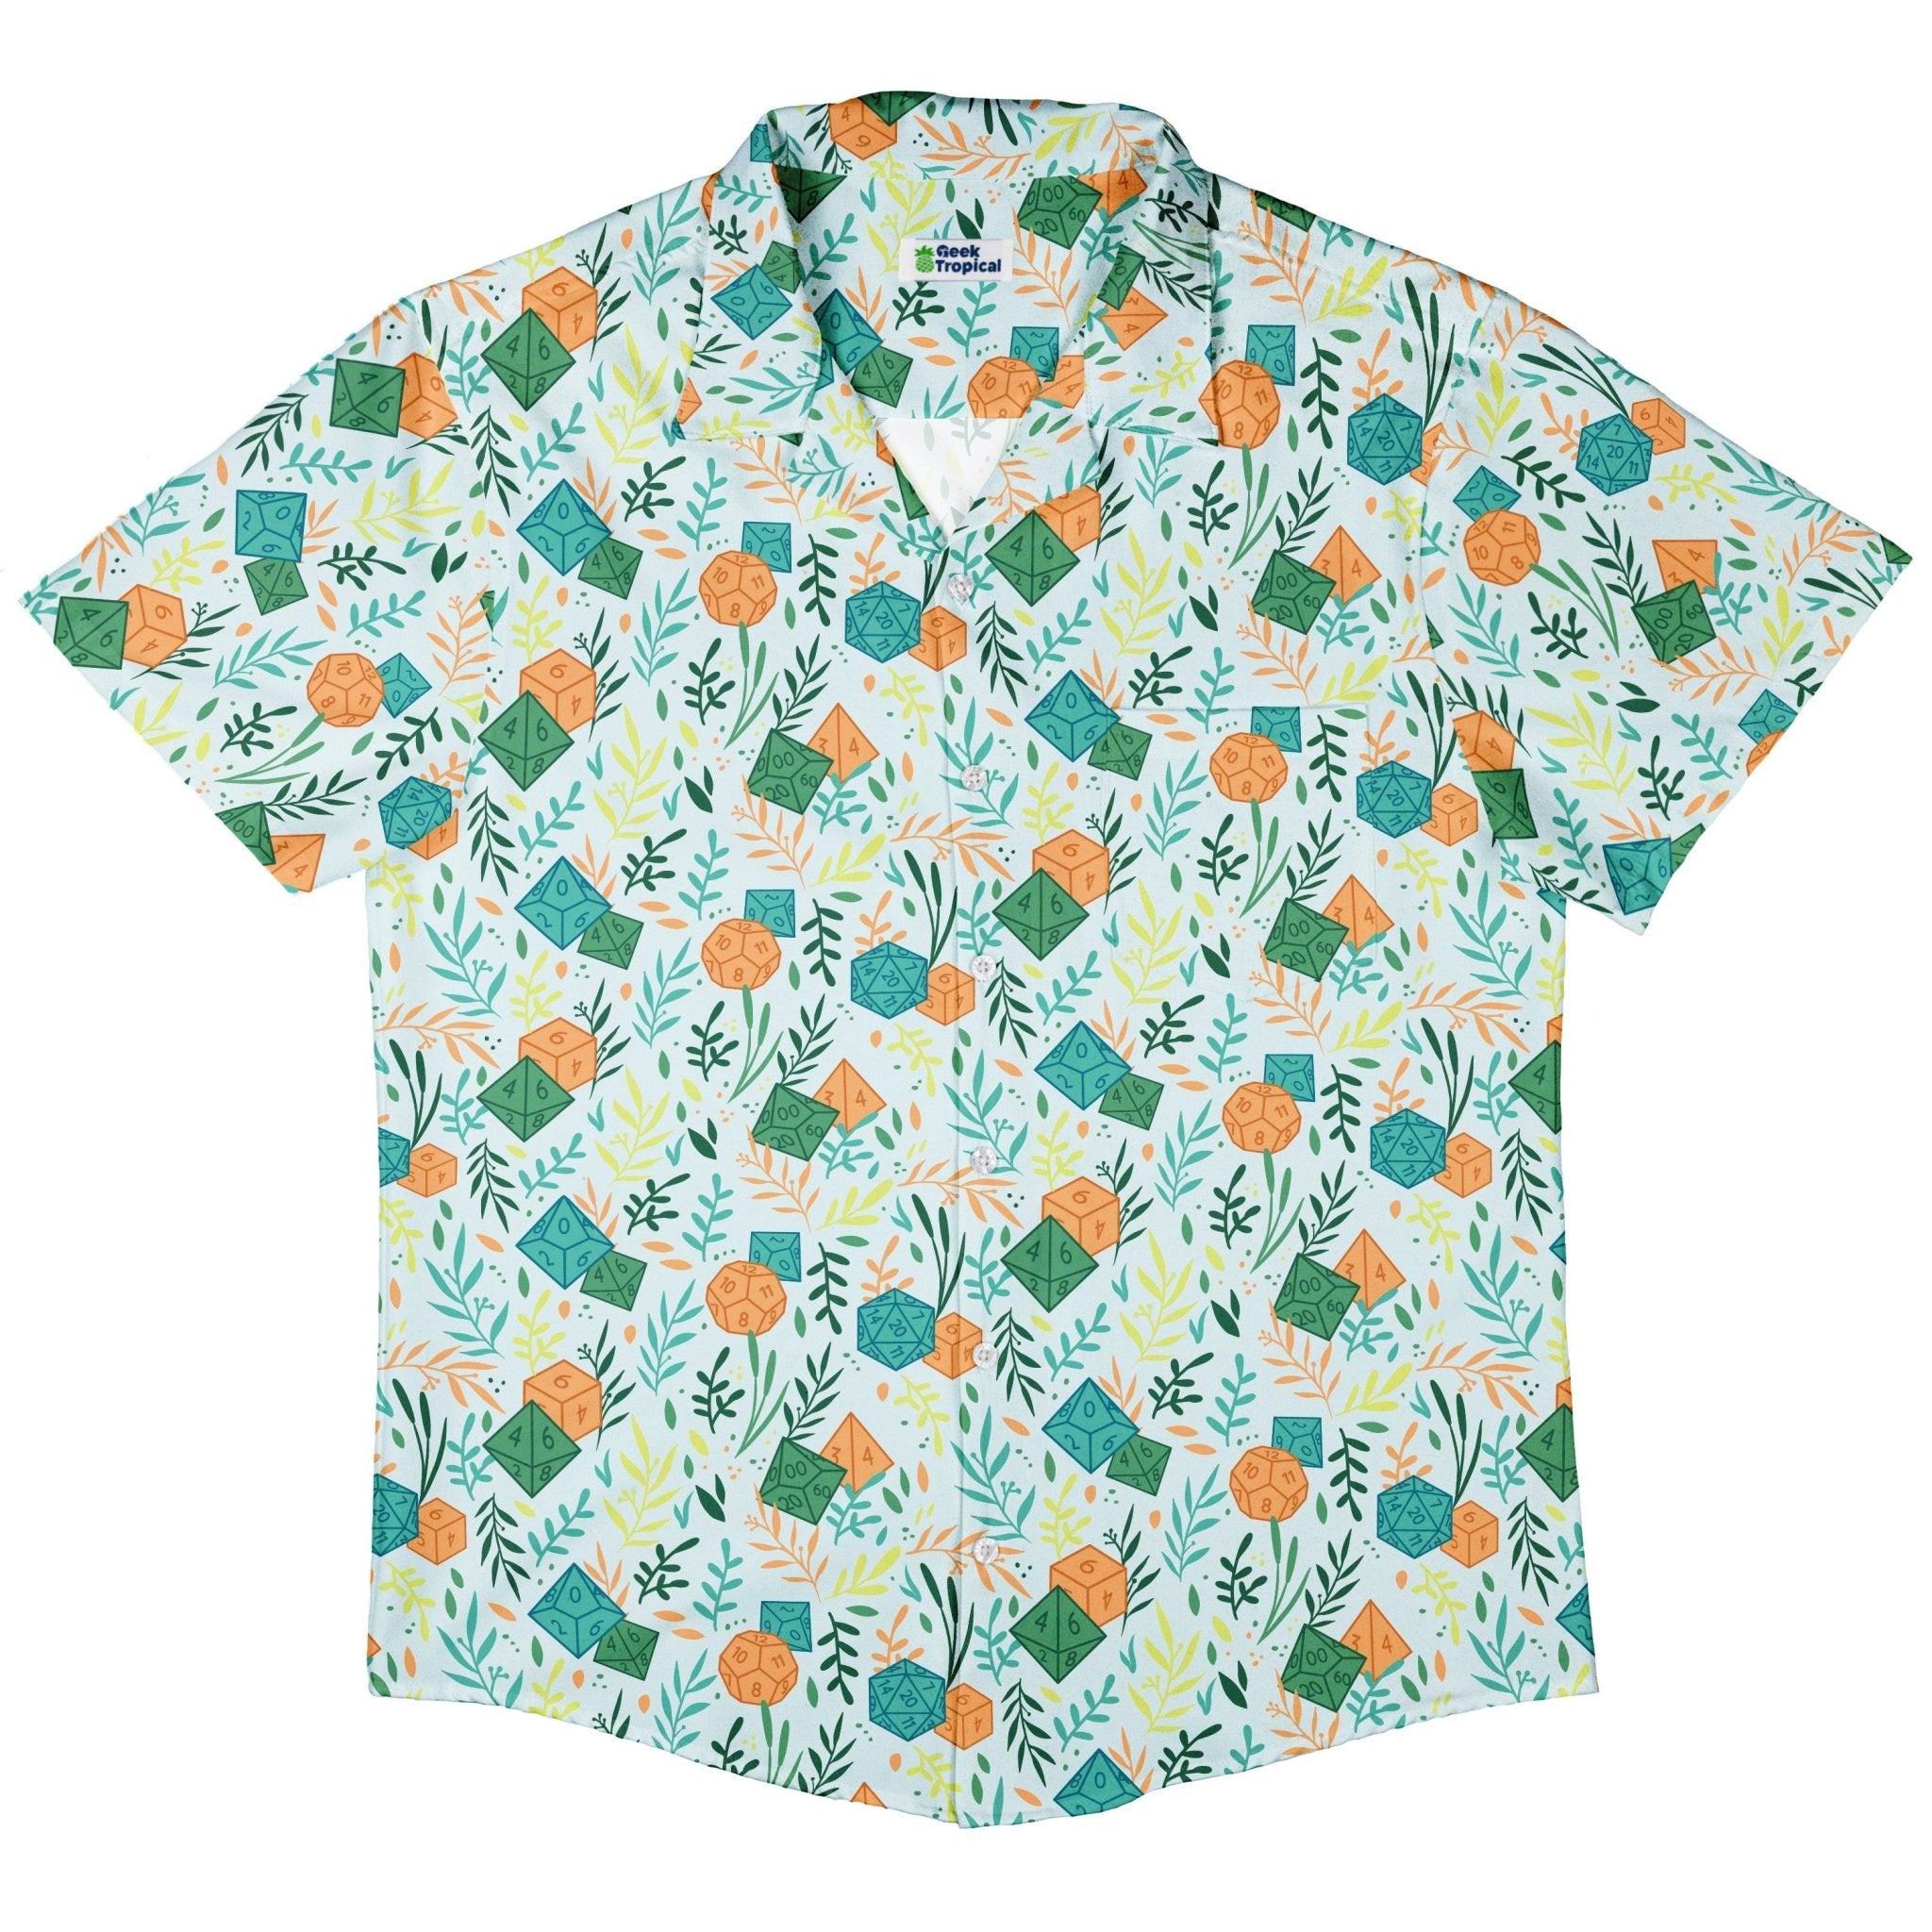 Dnd Dice Plants Button Up Shirt - adult sizing - dnd & rpg print - Simple Patterns